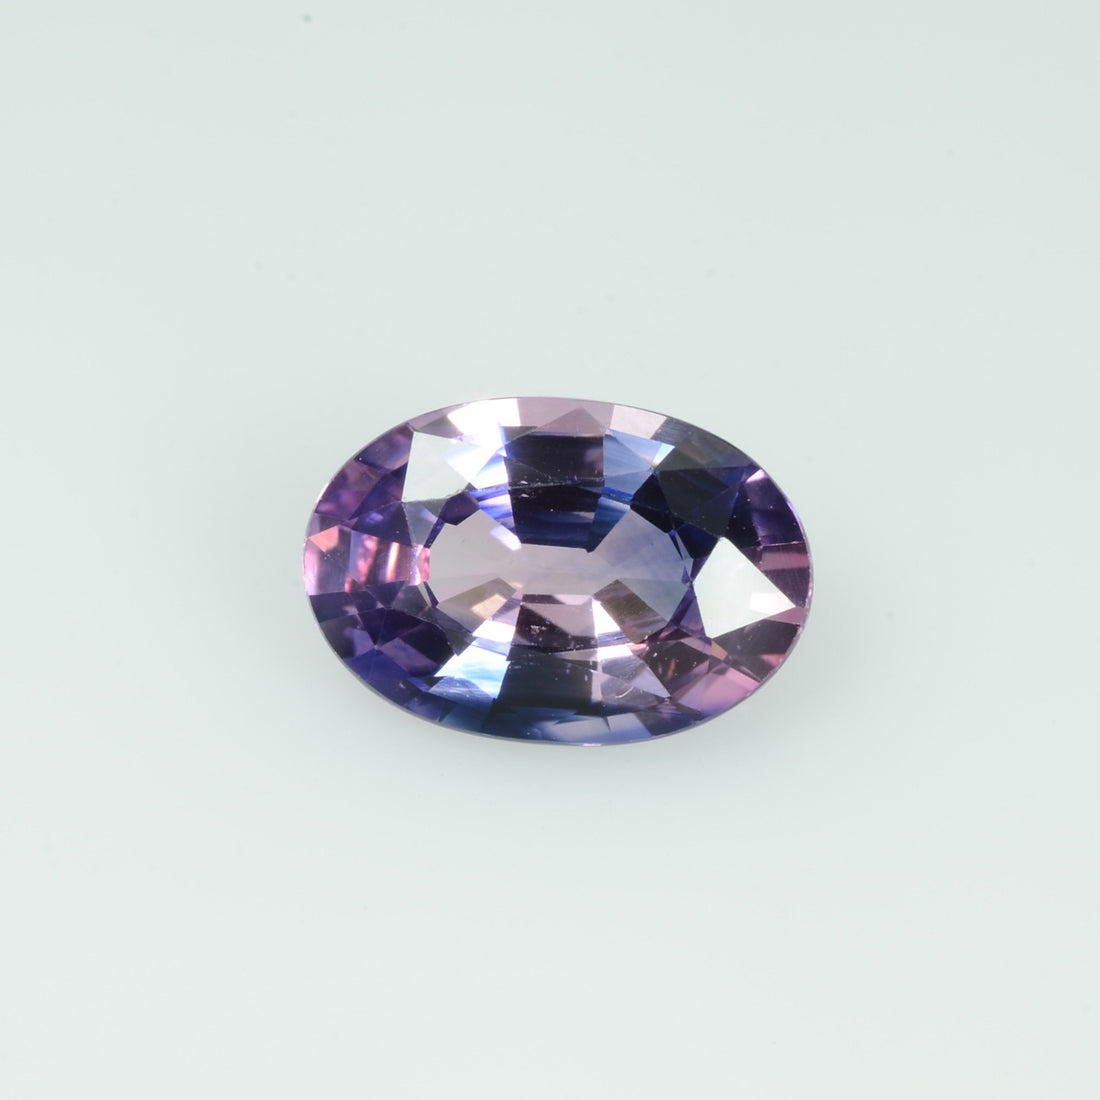 2.14 cts Natural Bi-color Sapphire Loose Gemstone Oval Cut